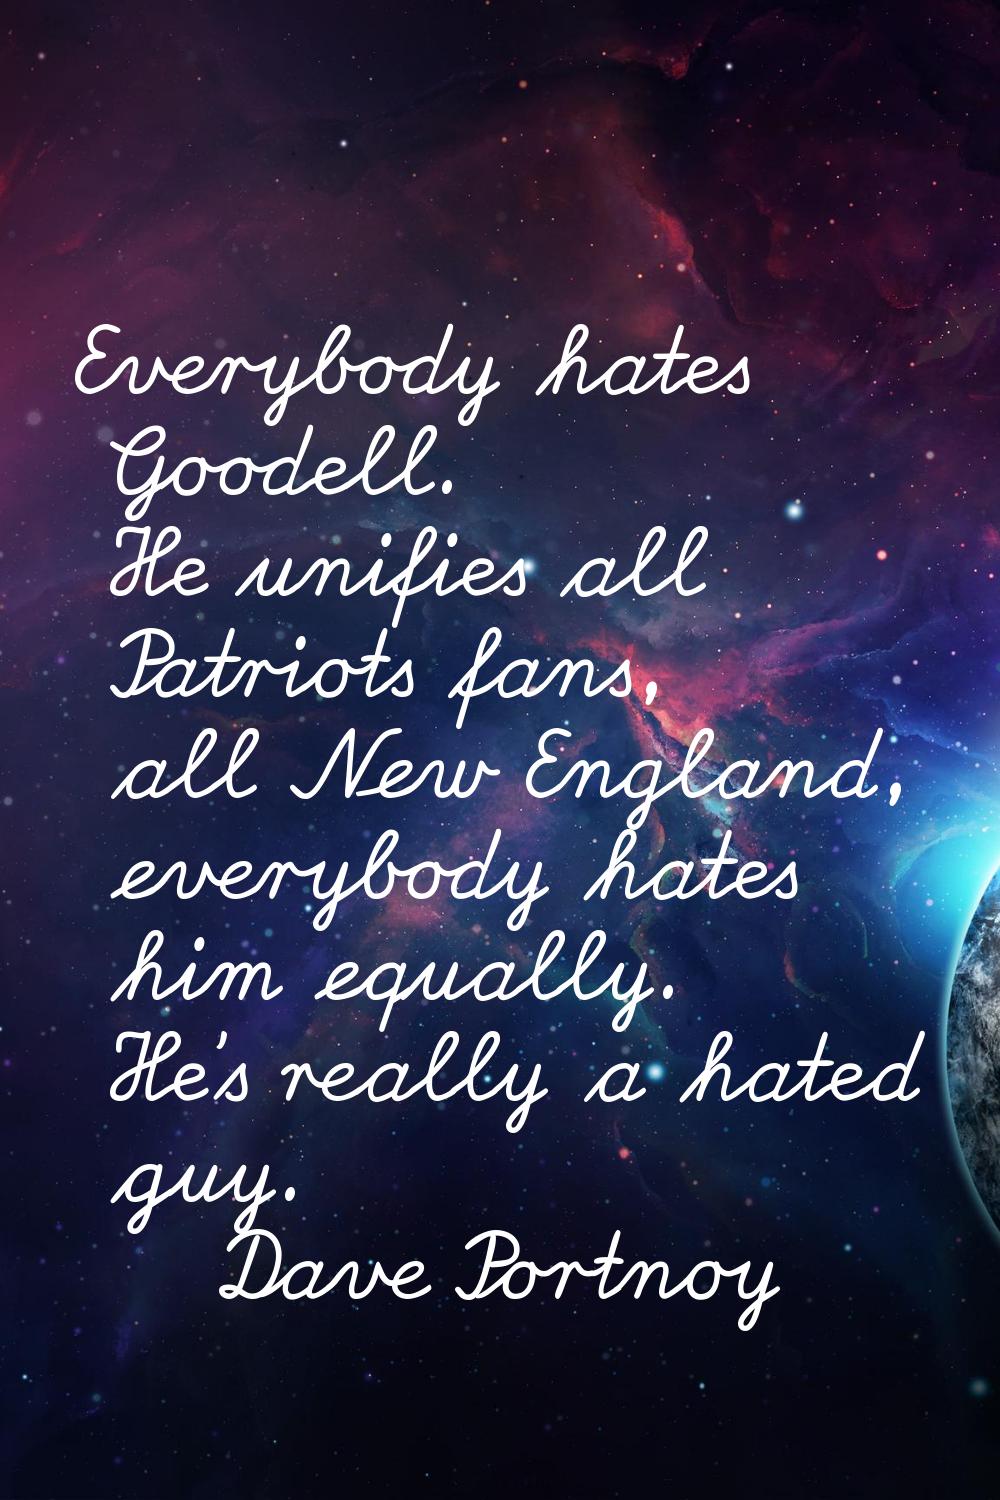 Everybody hates Goodell. He unifies all Patriots fans, all New England, everybody hates him equally